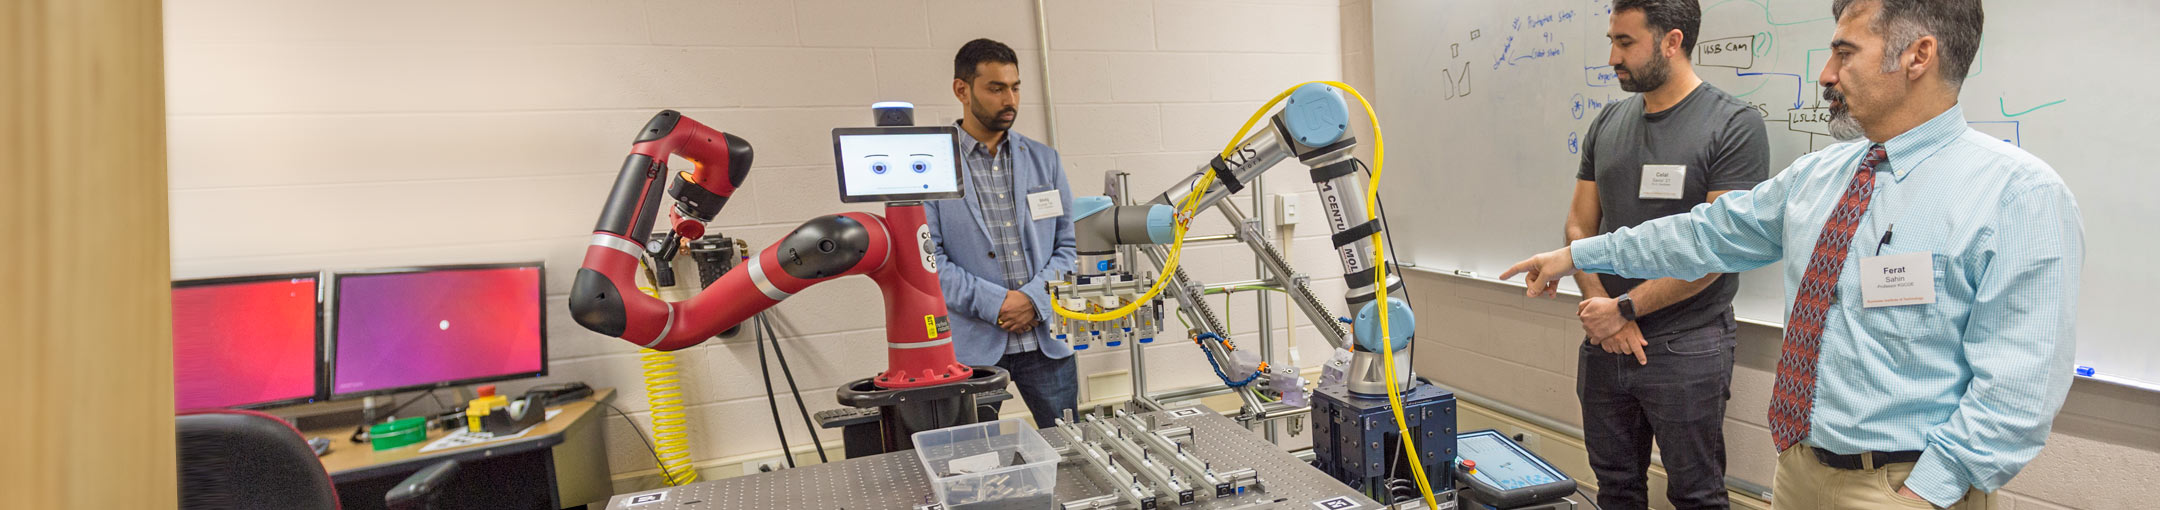 Students and professor work with robots with mechanical arms.